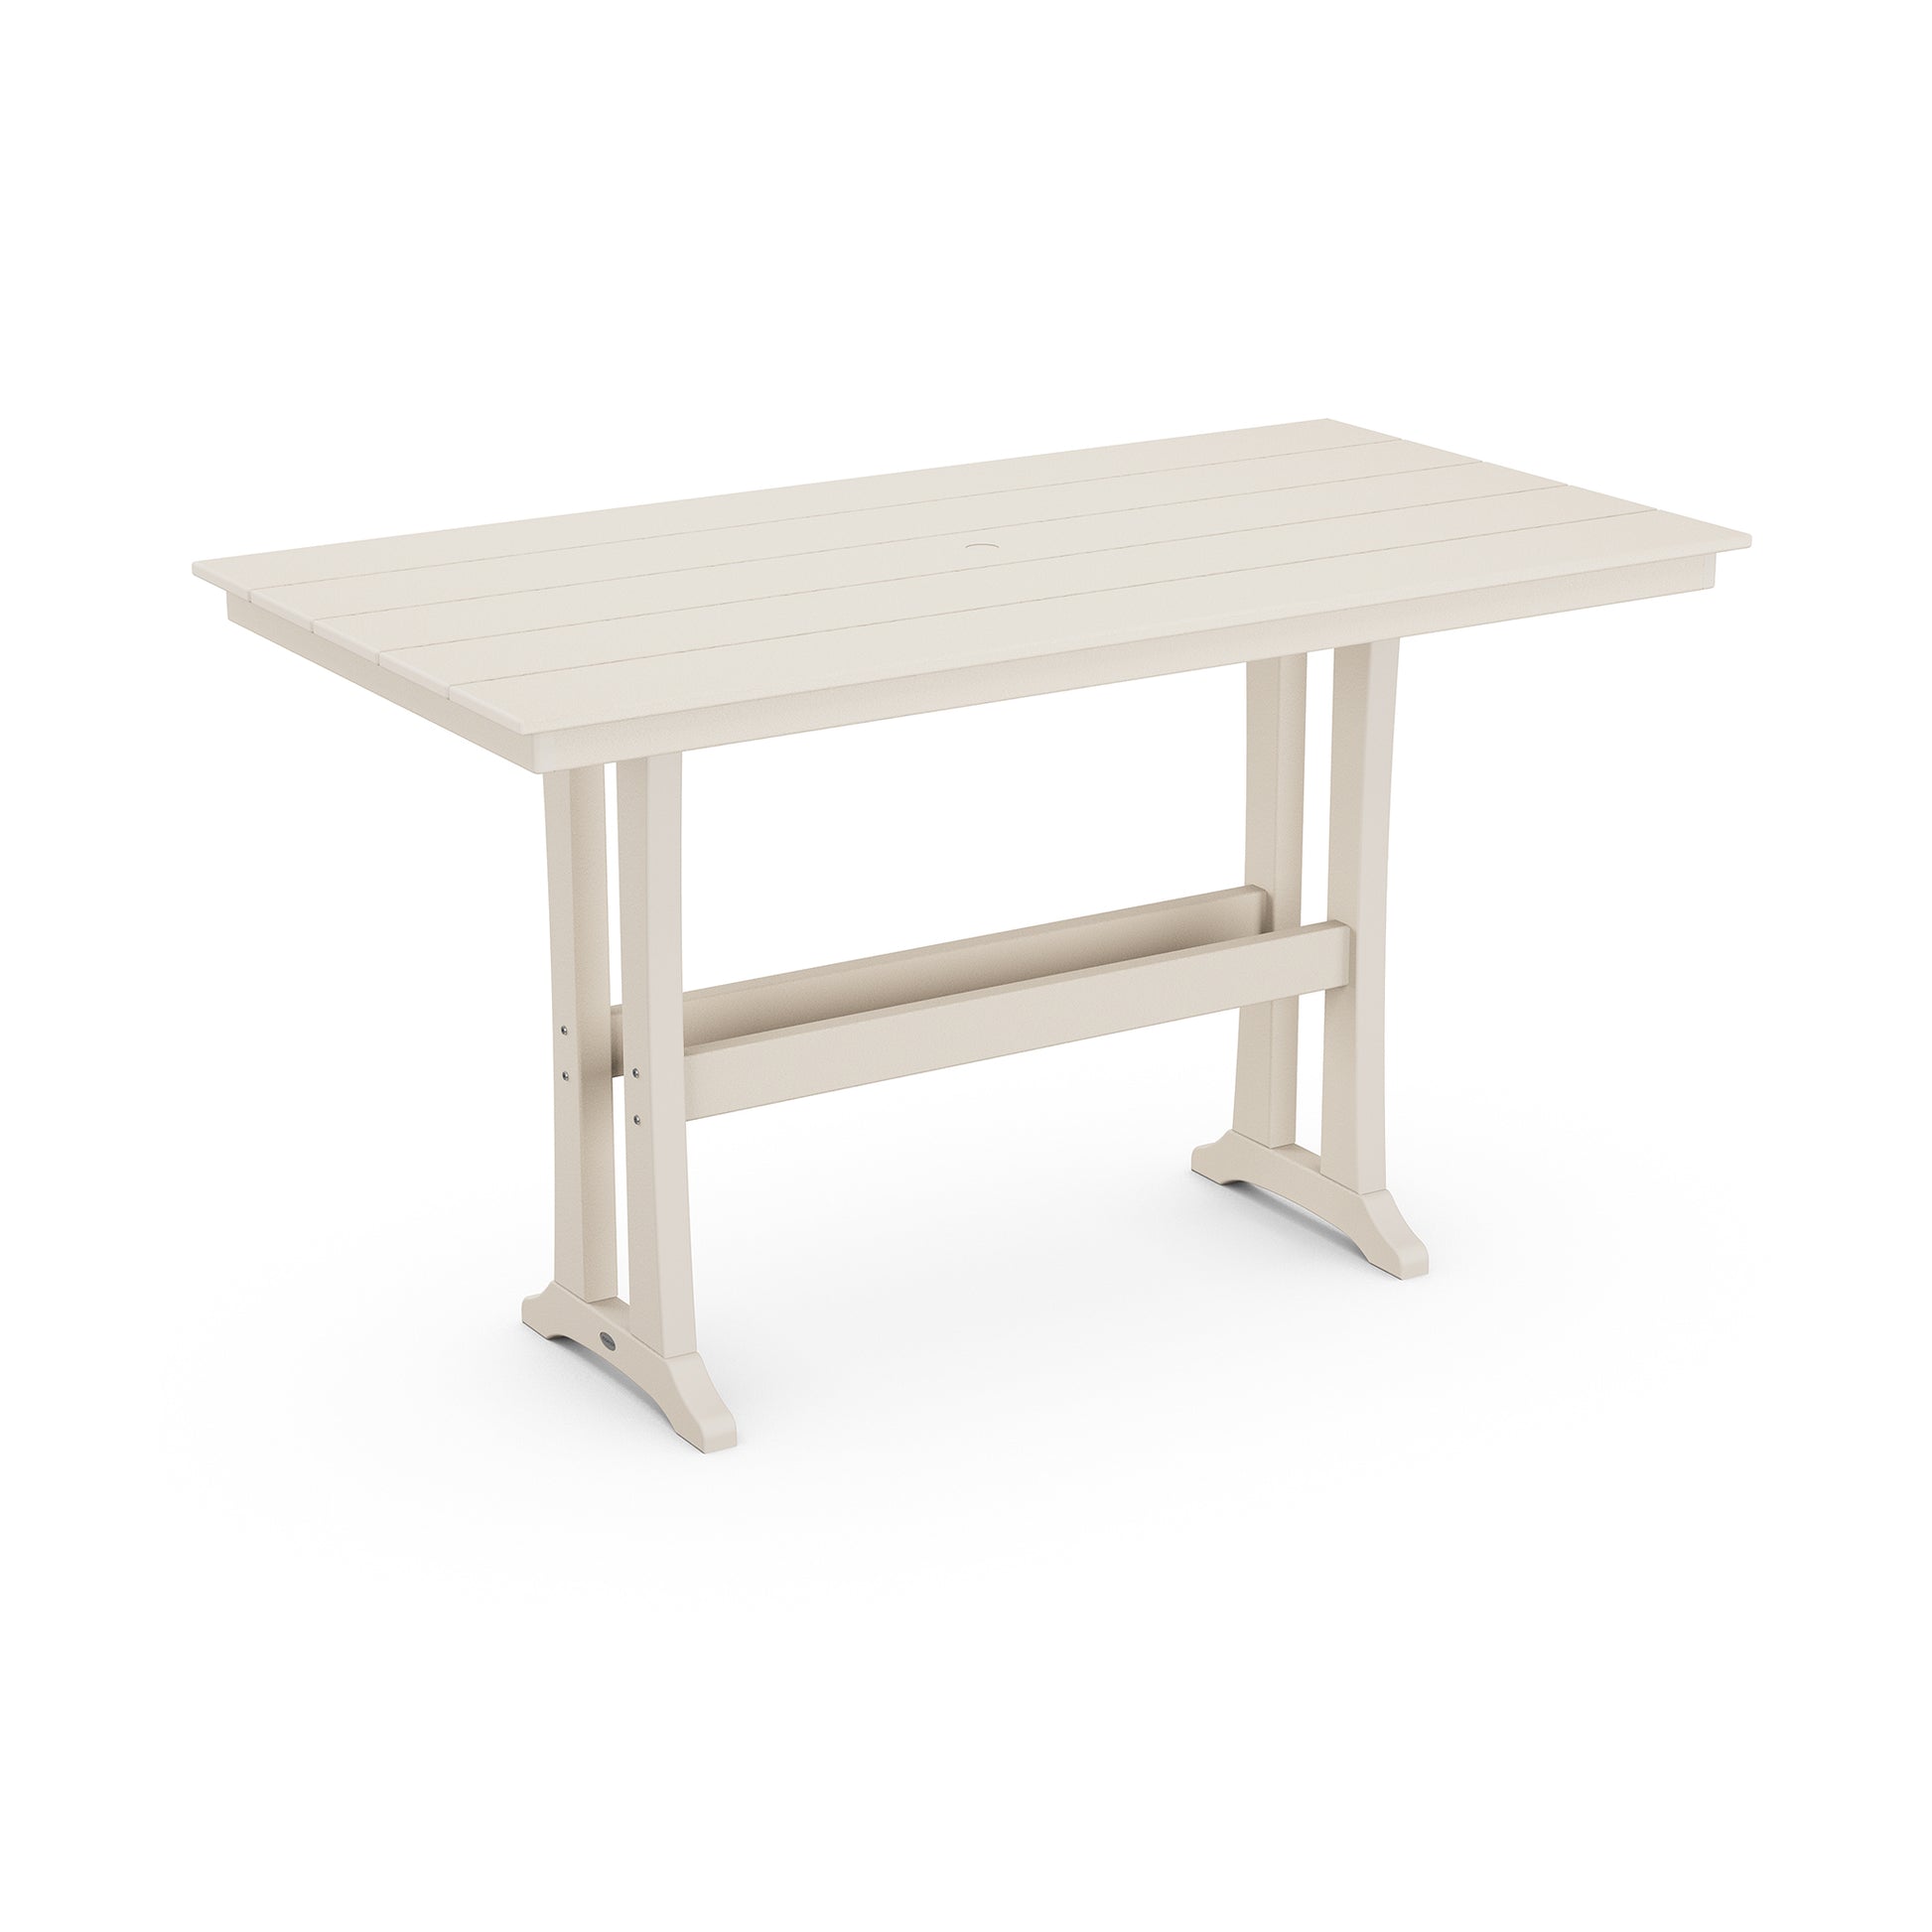 A modern beige adjustable-height desk with a minimalist design, featuring a flat tabletop crafted from POLYWOOD Farmhouse Trestle 37" x 72" Bar Table lumber and sturdy metal legs, isolated on a white background.